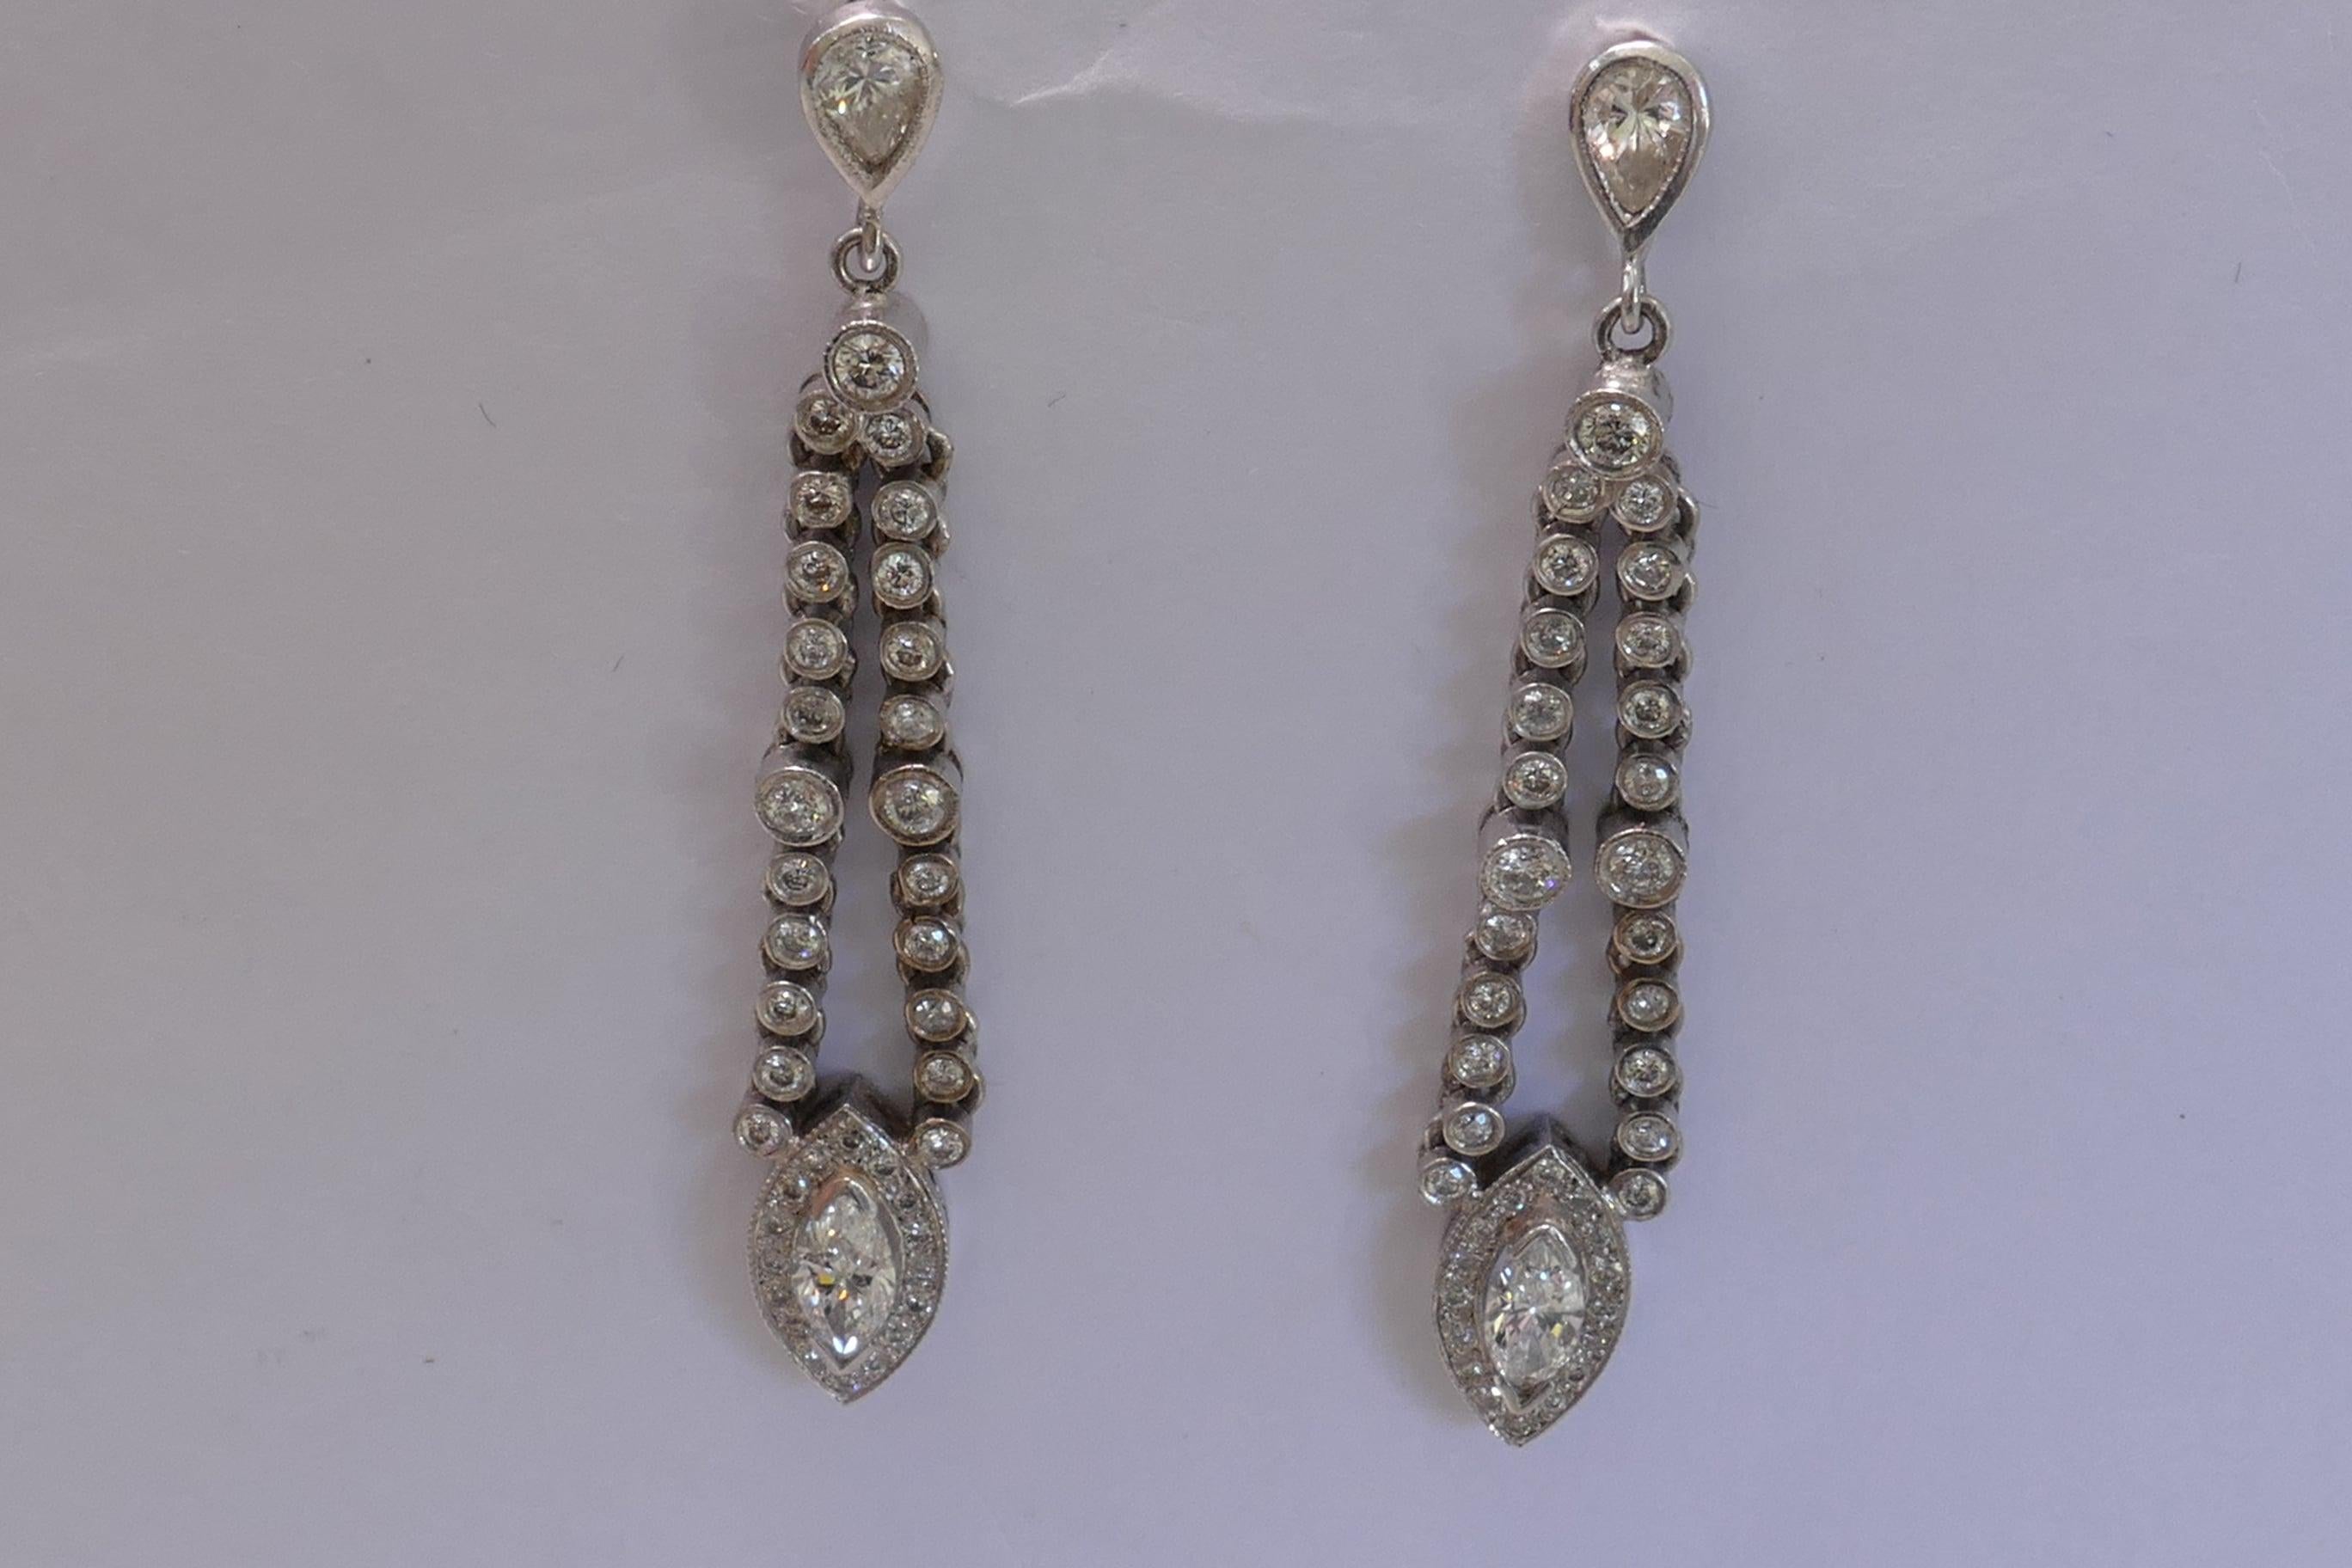 Each Earring has a Pear Shape Cut Diamond Bezel Set in 18ct White Gold above 2 rows of 23 Round Brilliant Cut Diamonds & a diamond cluster of a Marquise Diamond  within a border of Brilliant Cut Diamonds.
Total Diamond Weight 1.72 Carats
Total Item